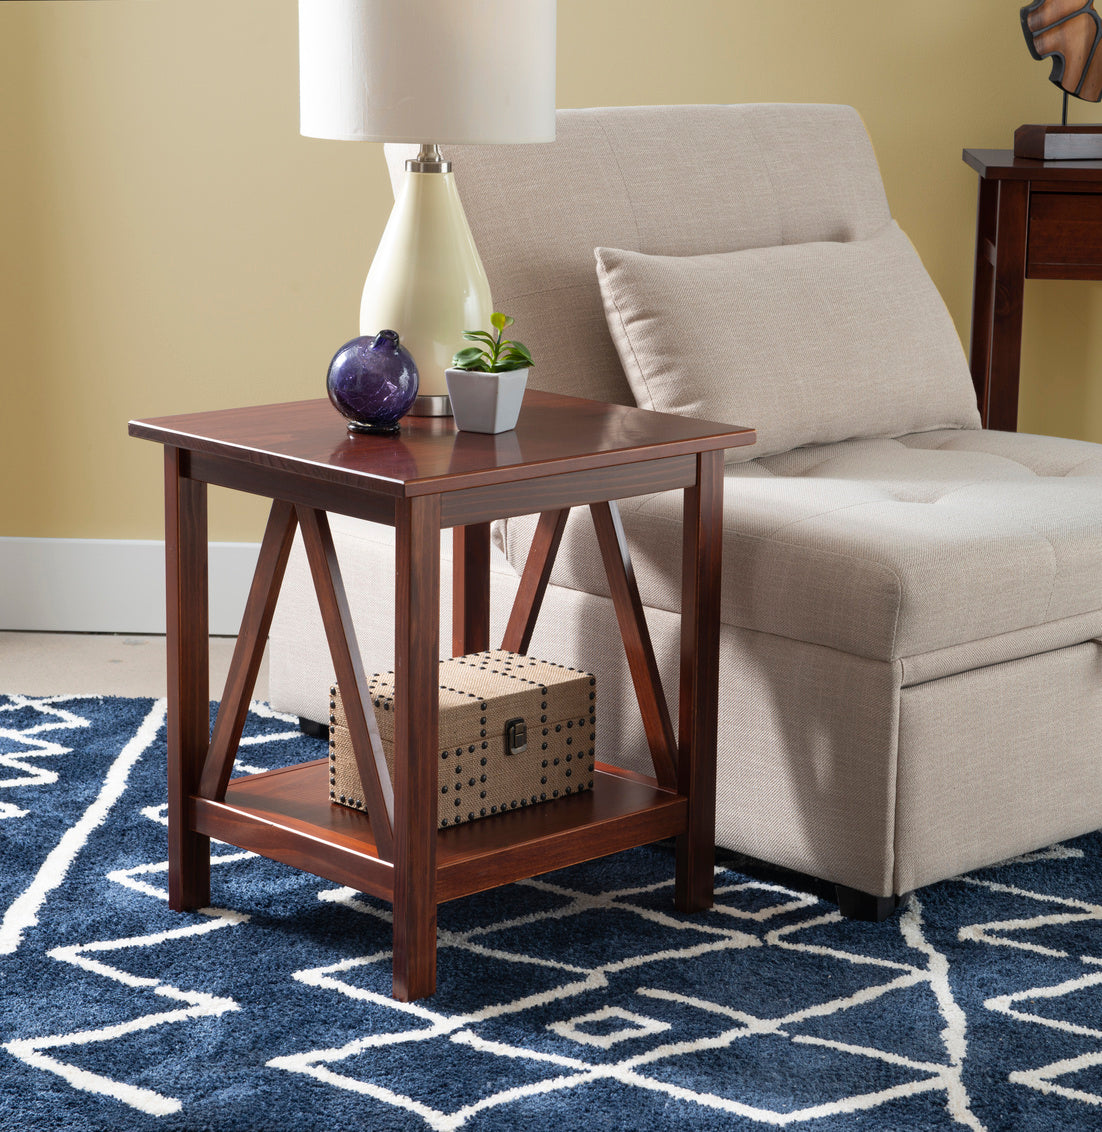 WEEKLY or MONTHLY. Titan Deep Brown Console and End Table